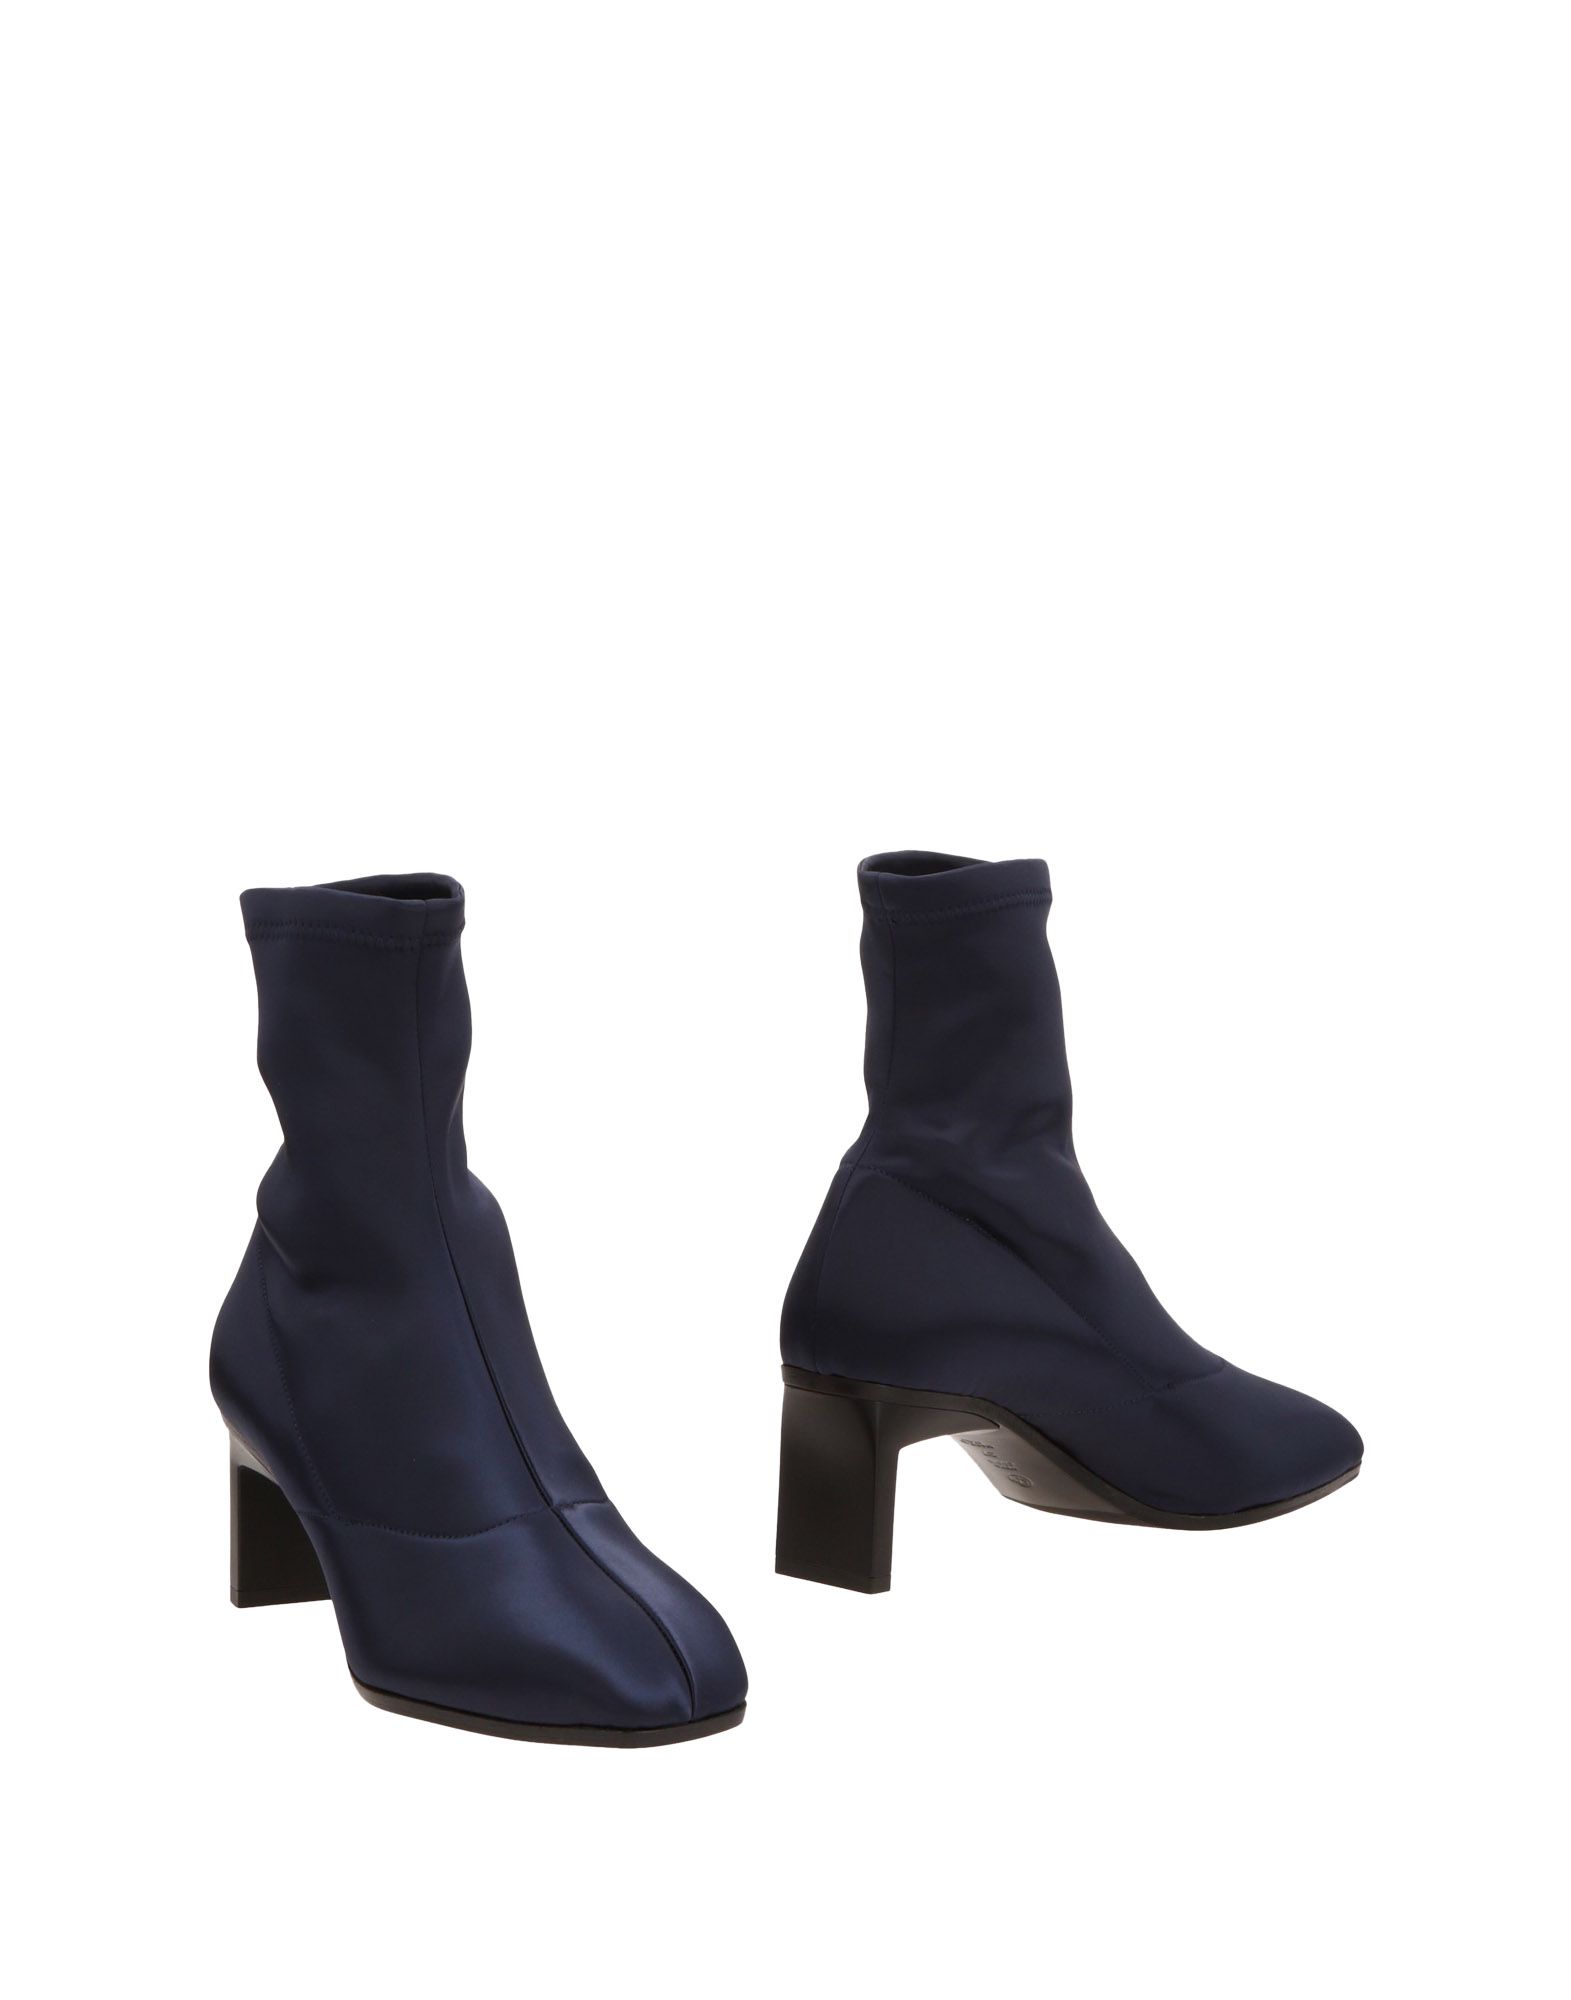 3.1 PHILLIP LIM / フィリップ リム Ankle boot,11460113DS 13